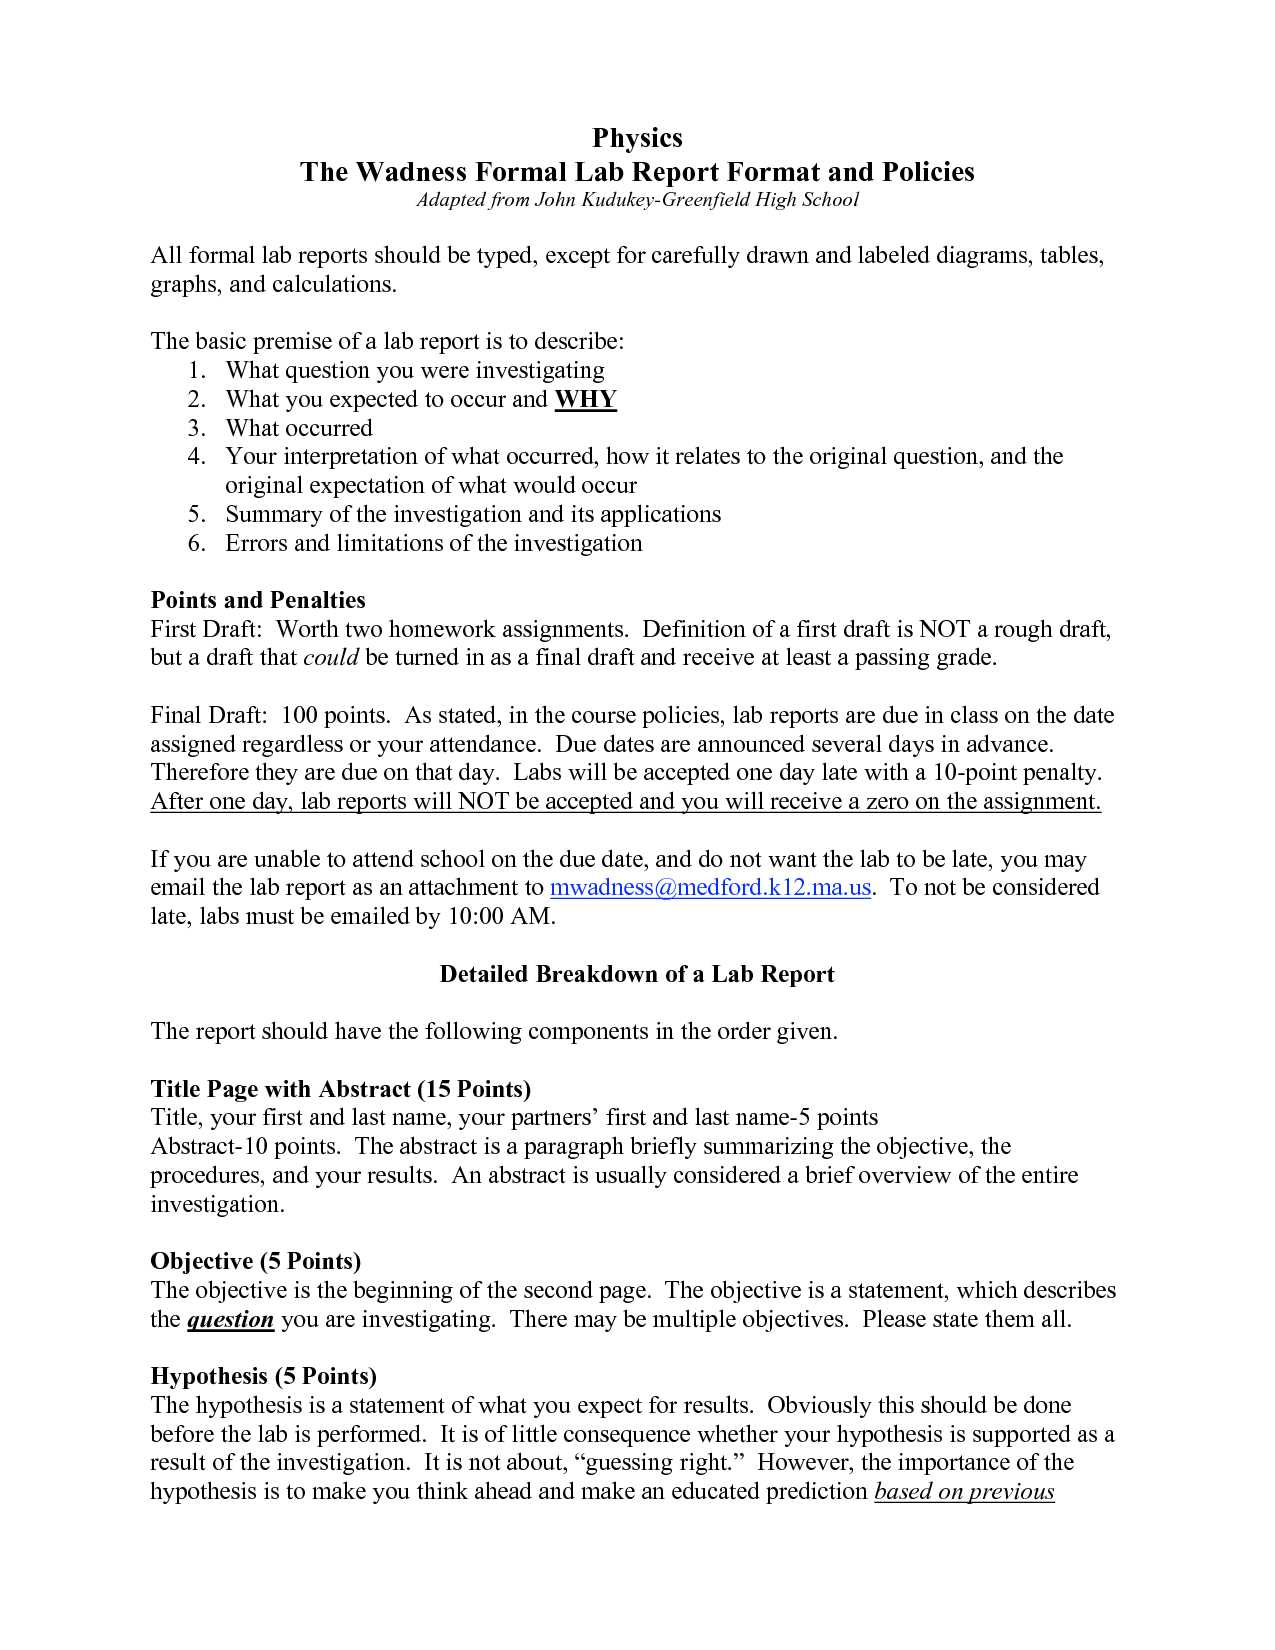 Formal Lab Report Template Physics : Biological Science In Physics Lab Report Template